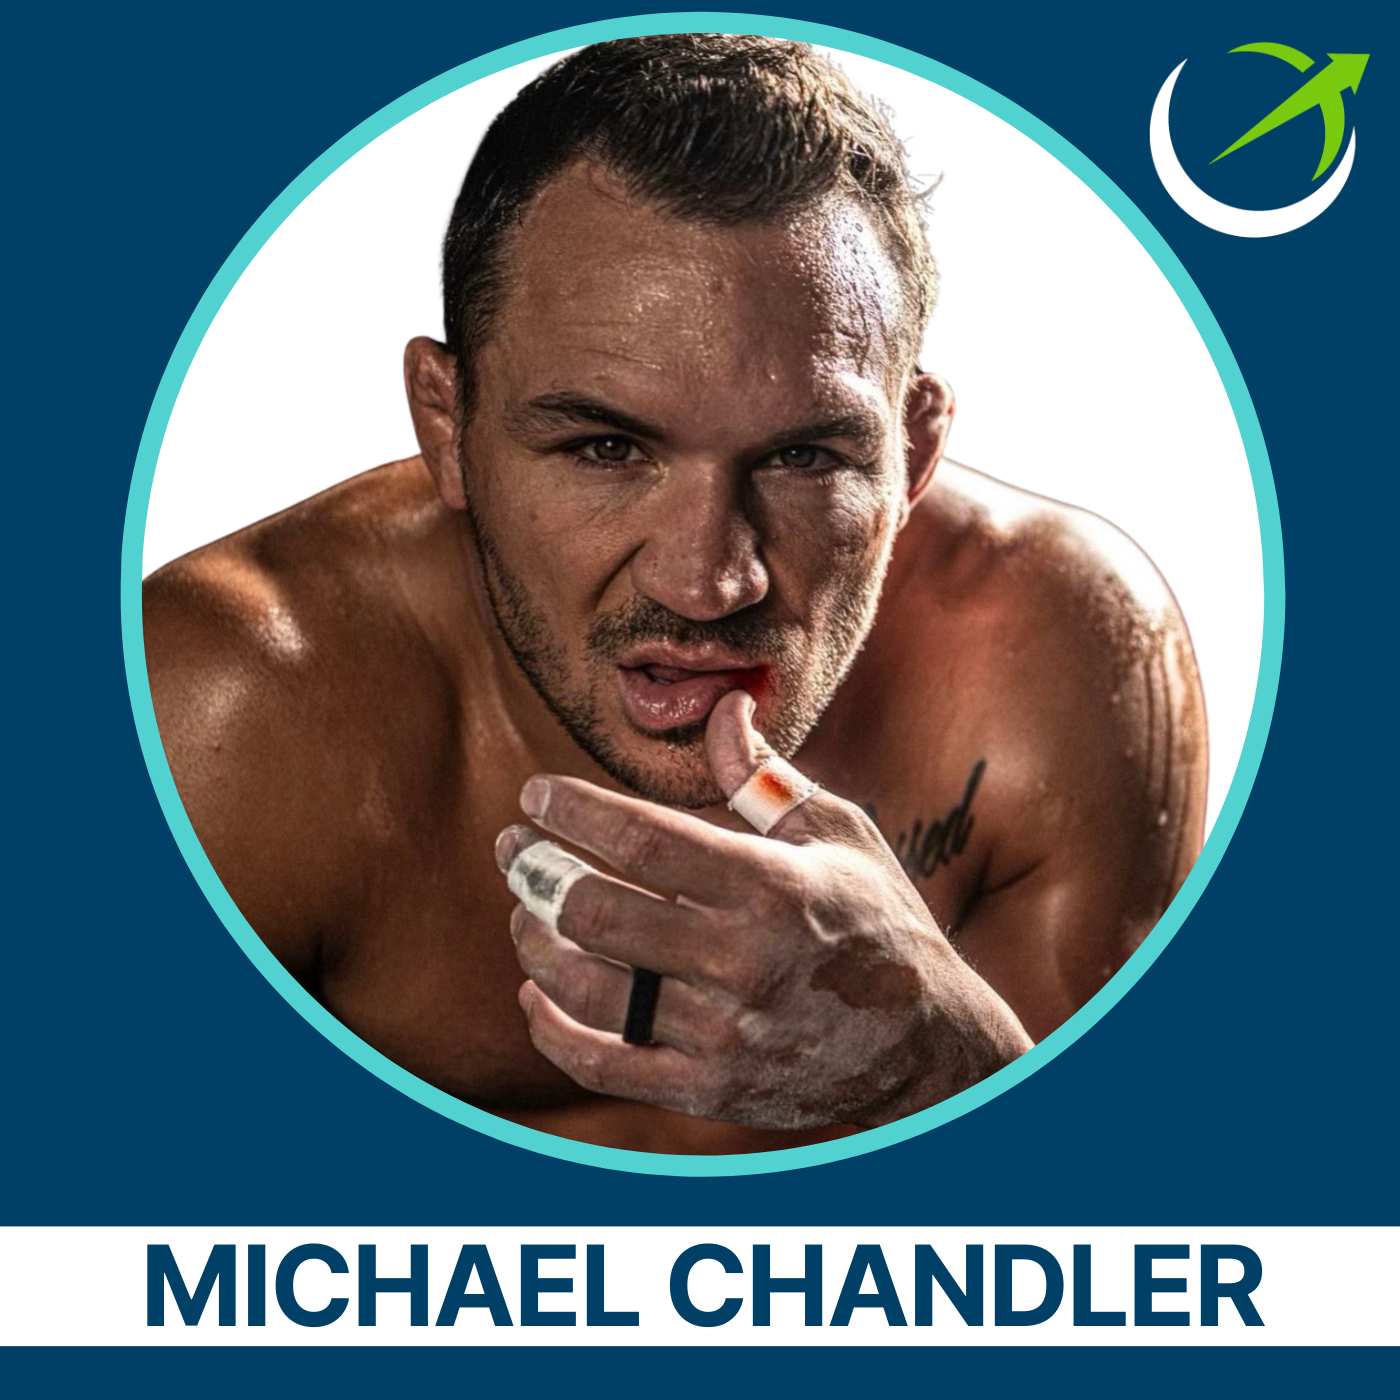 Biohacking The Brain, Choosing Safe Supplements, Raw Liver, Getting To Sleep Without Medication & More With UFC MMA Fighter Michael Chandler.